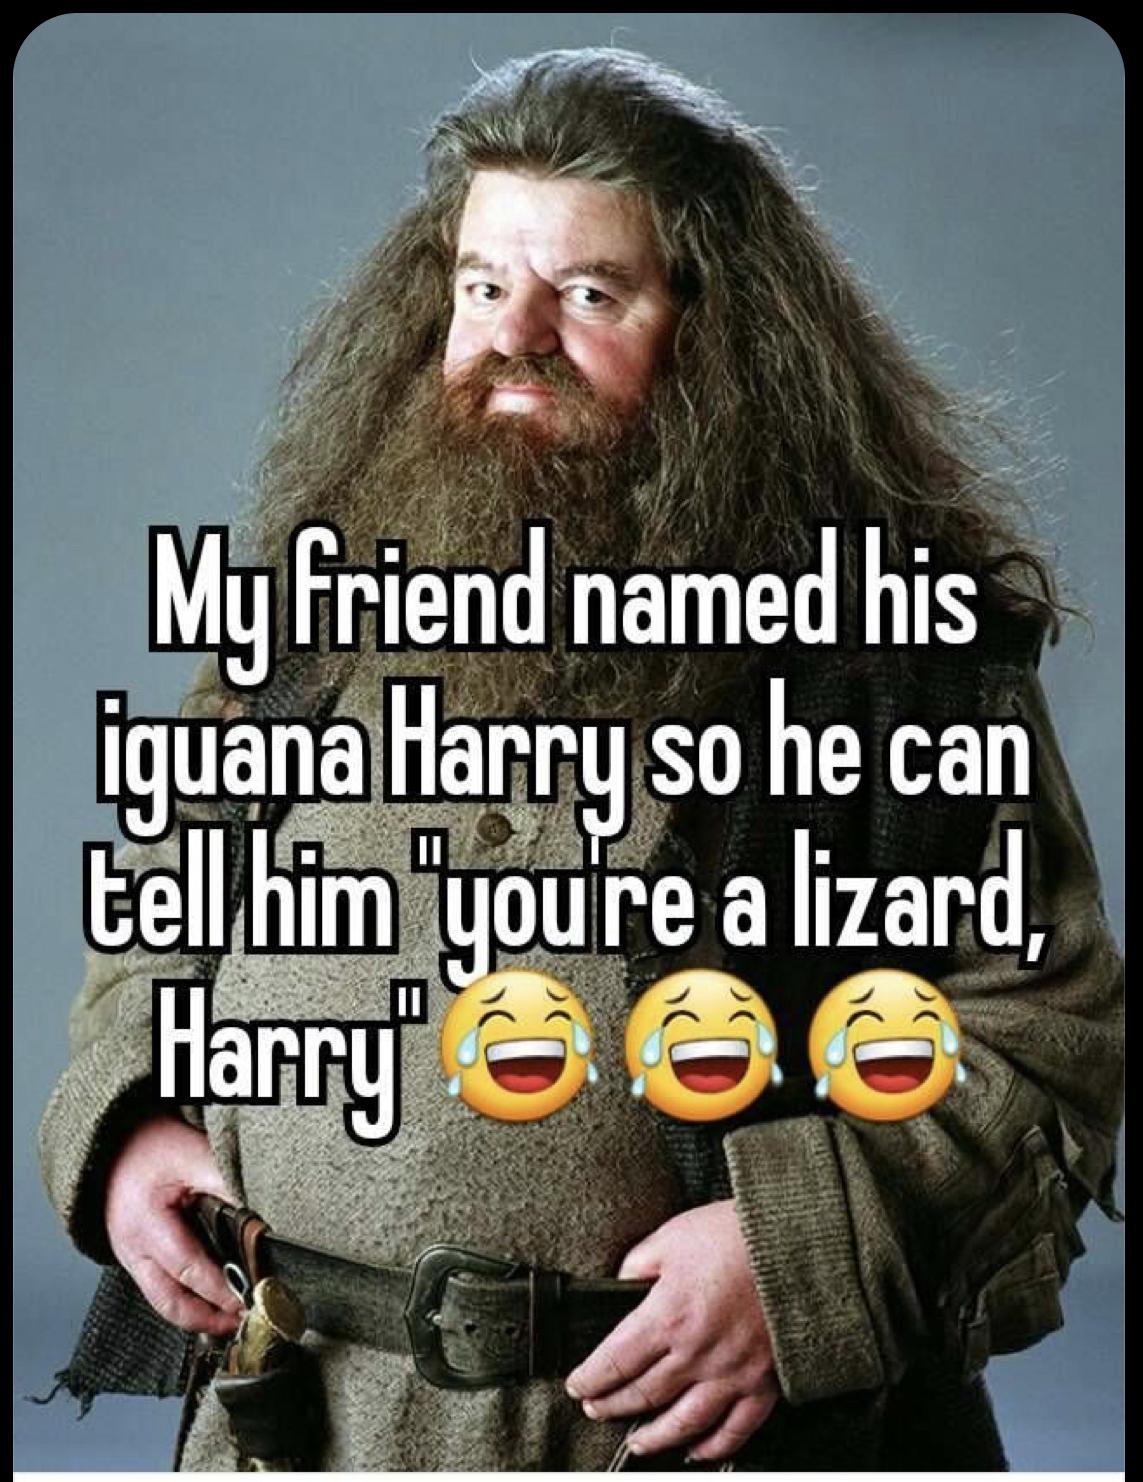 30 Hilarious Harry Potter Memes To Celebrate The 20-Year